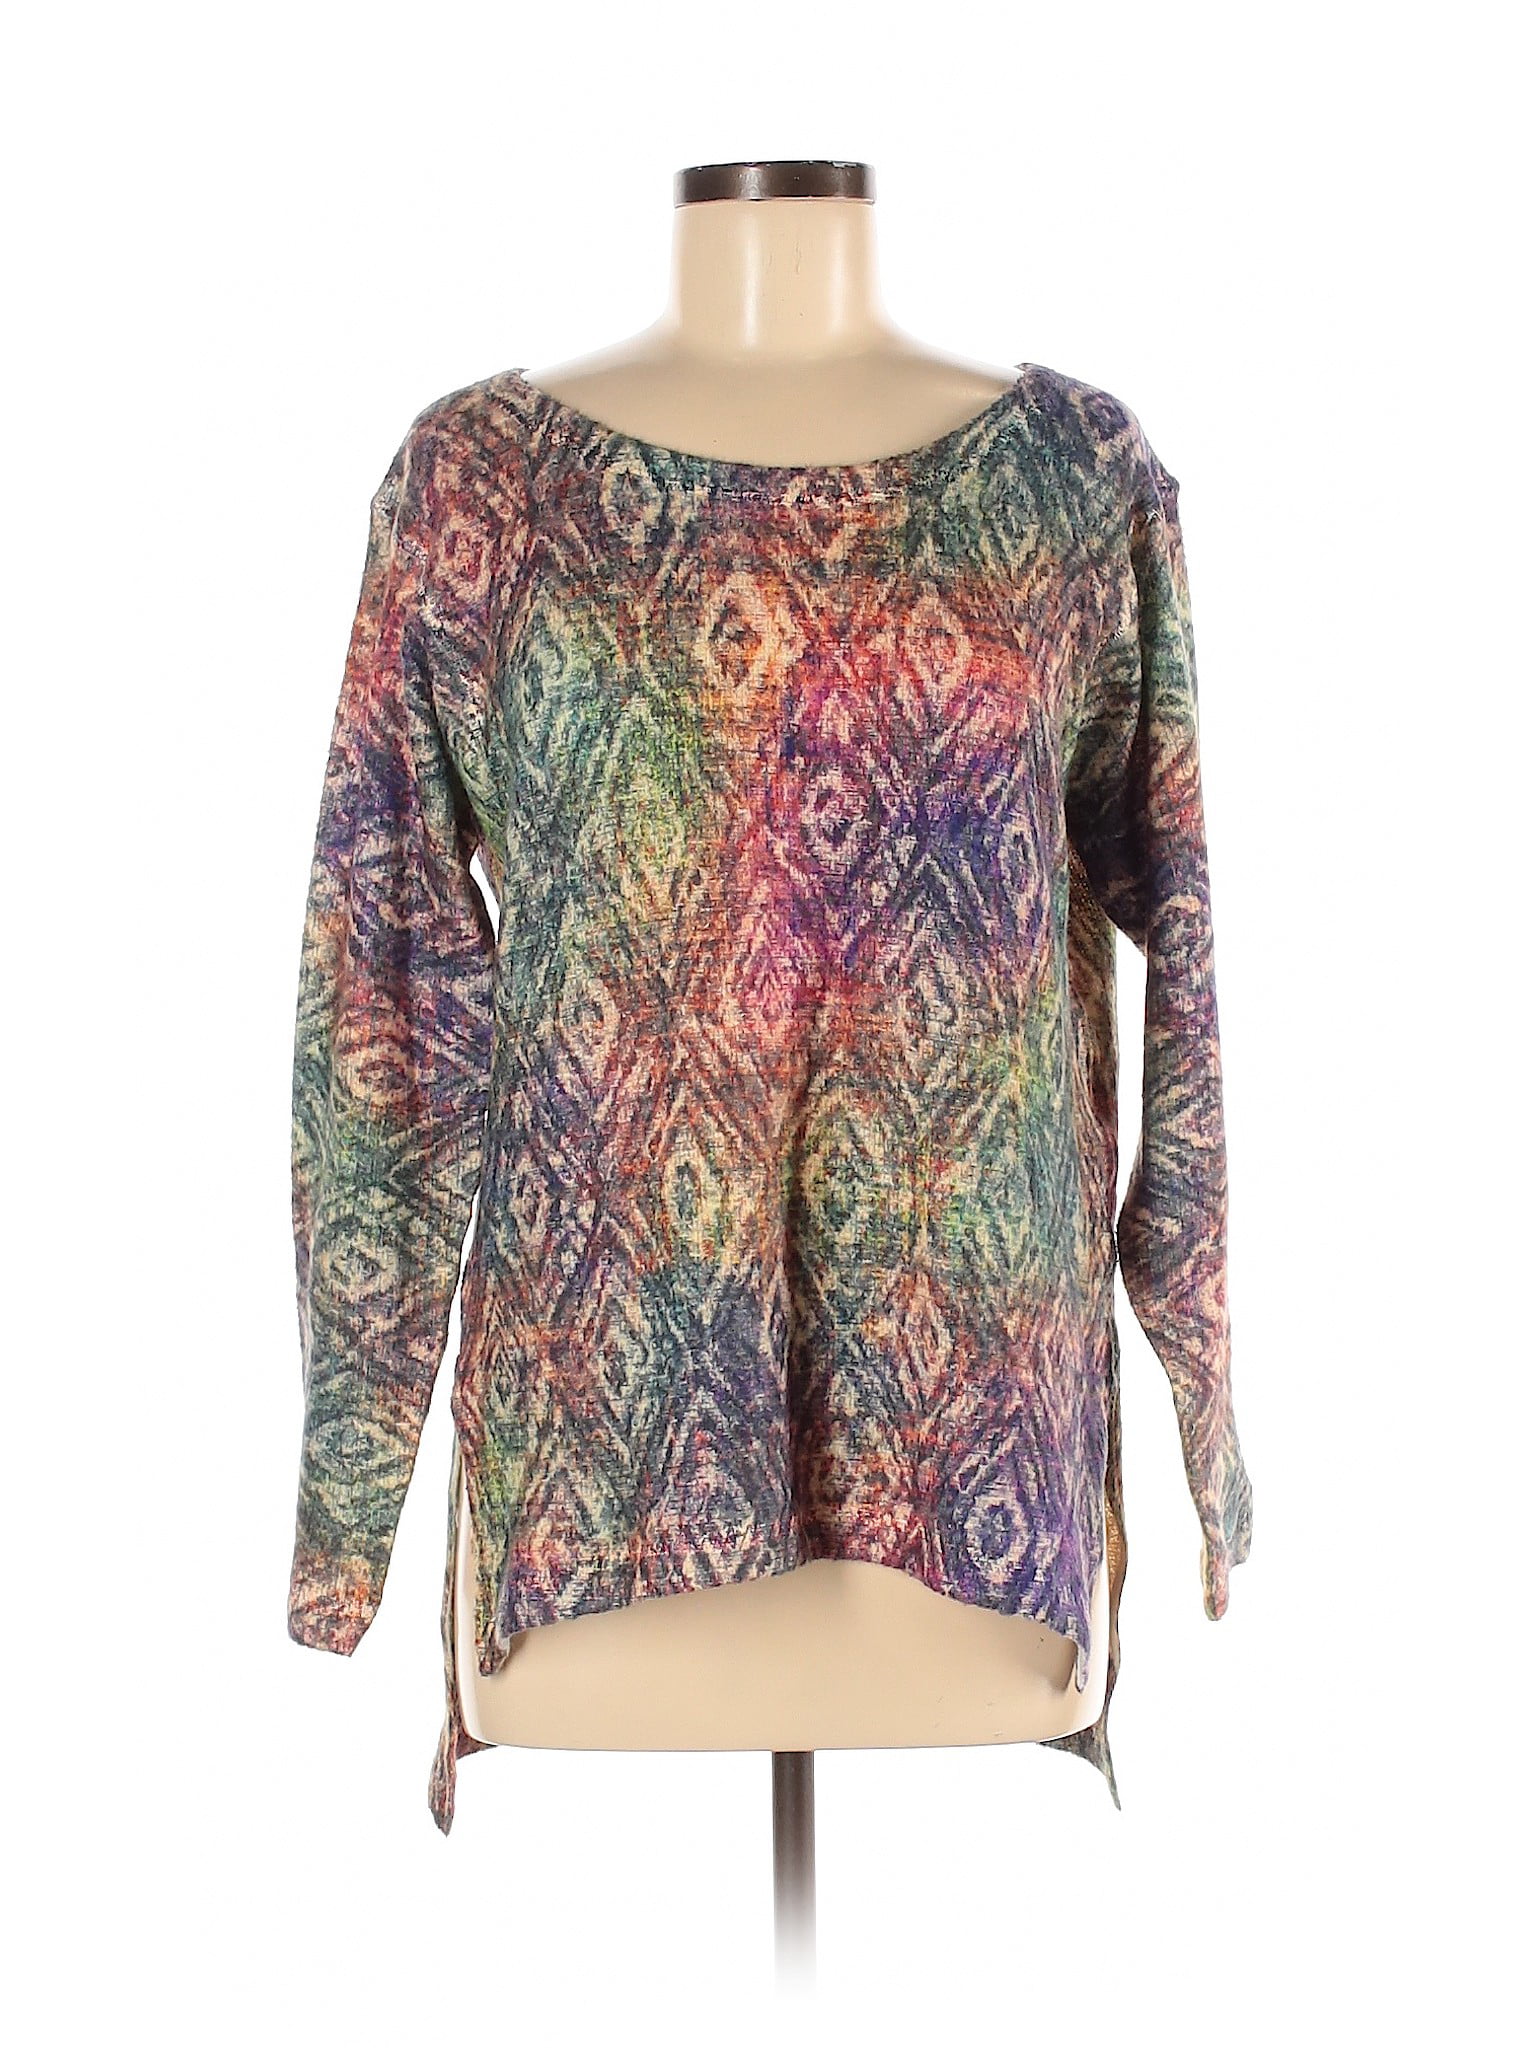 Nally & Millie - Pre-Owned Nally & Millie Women's Size M Pullover ...